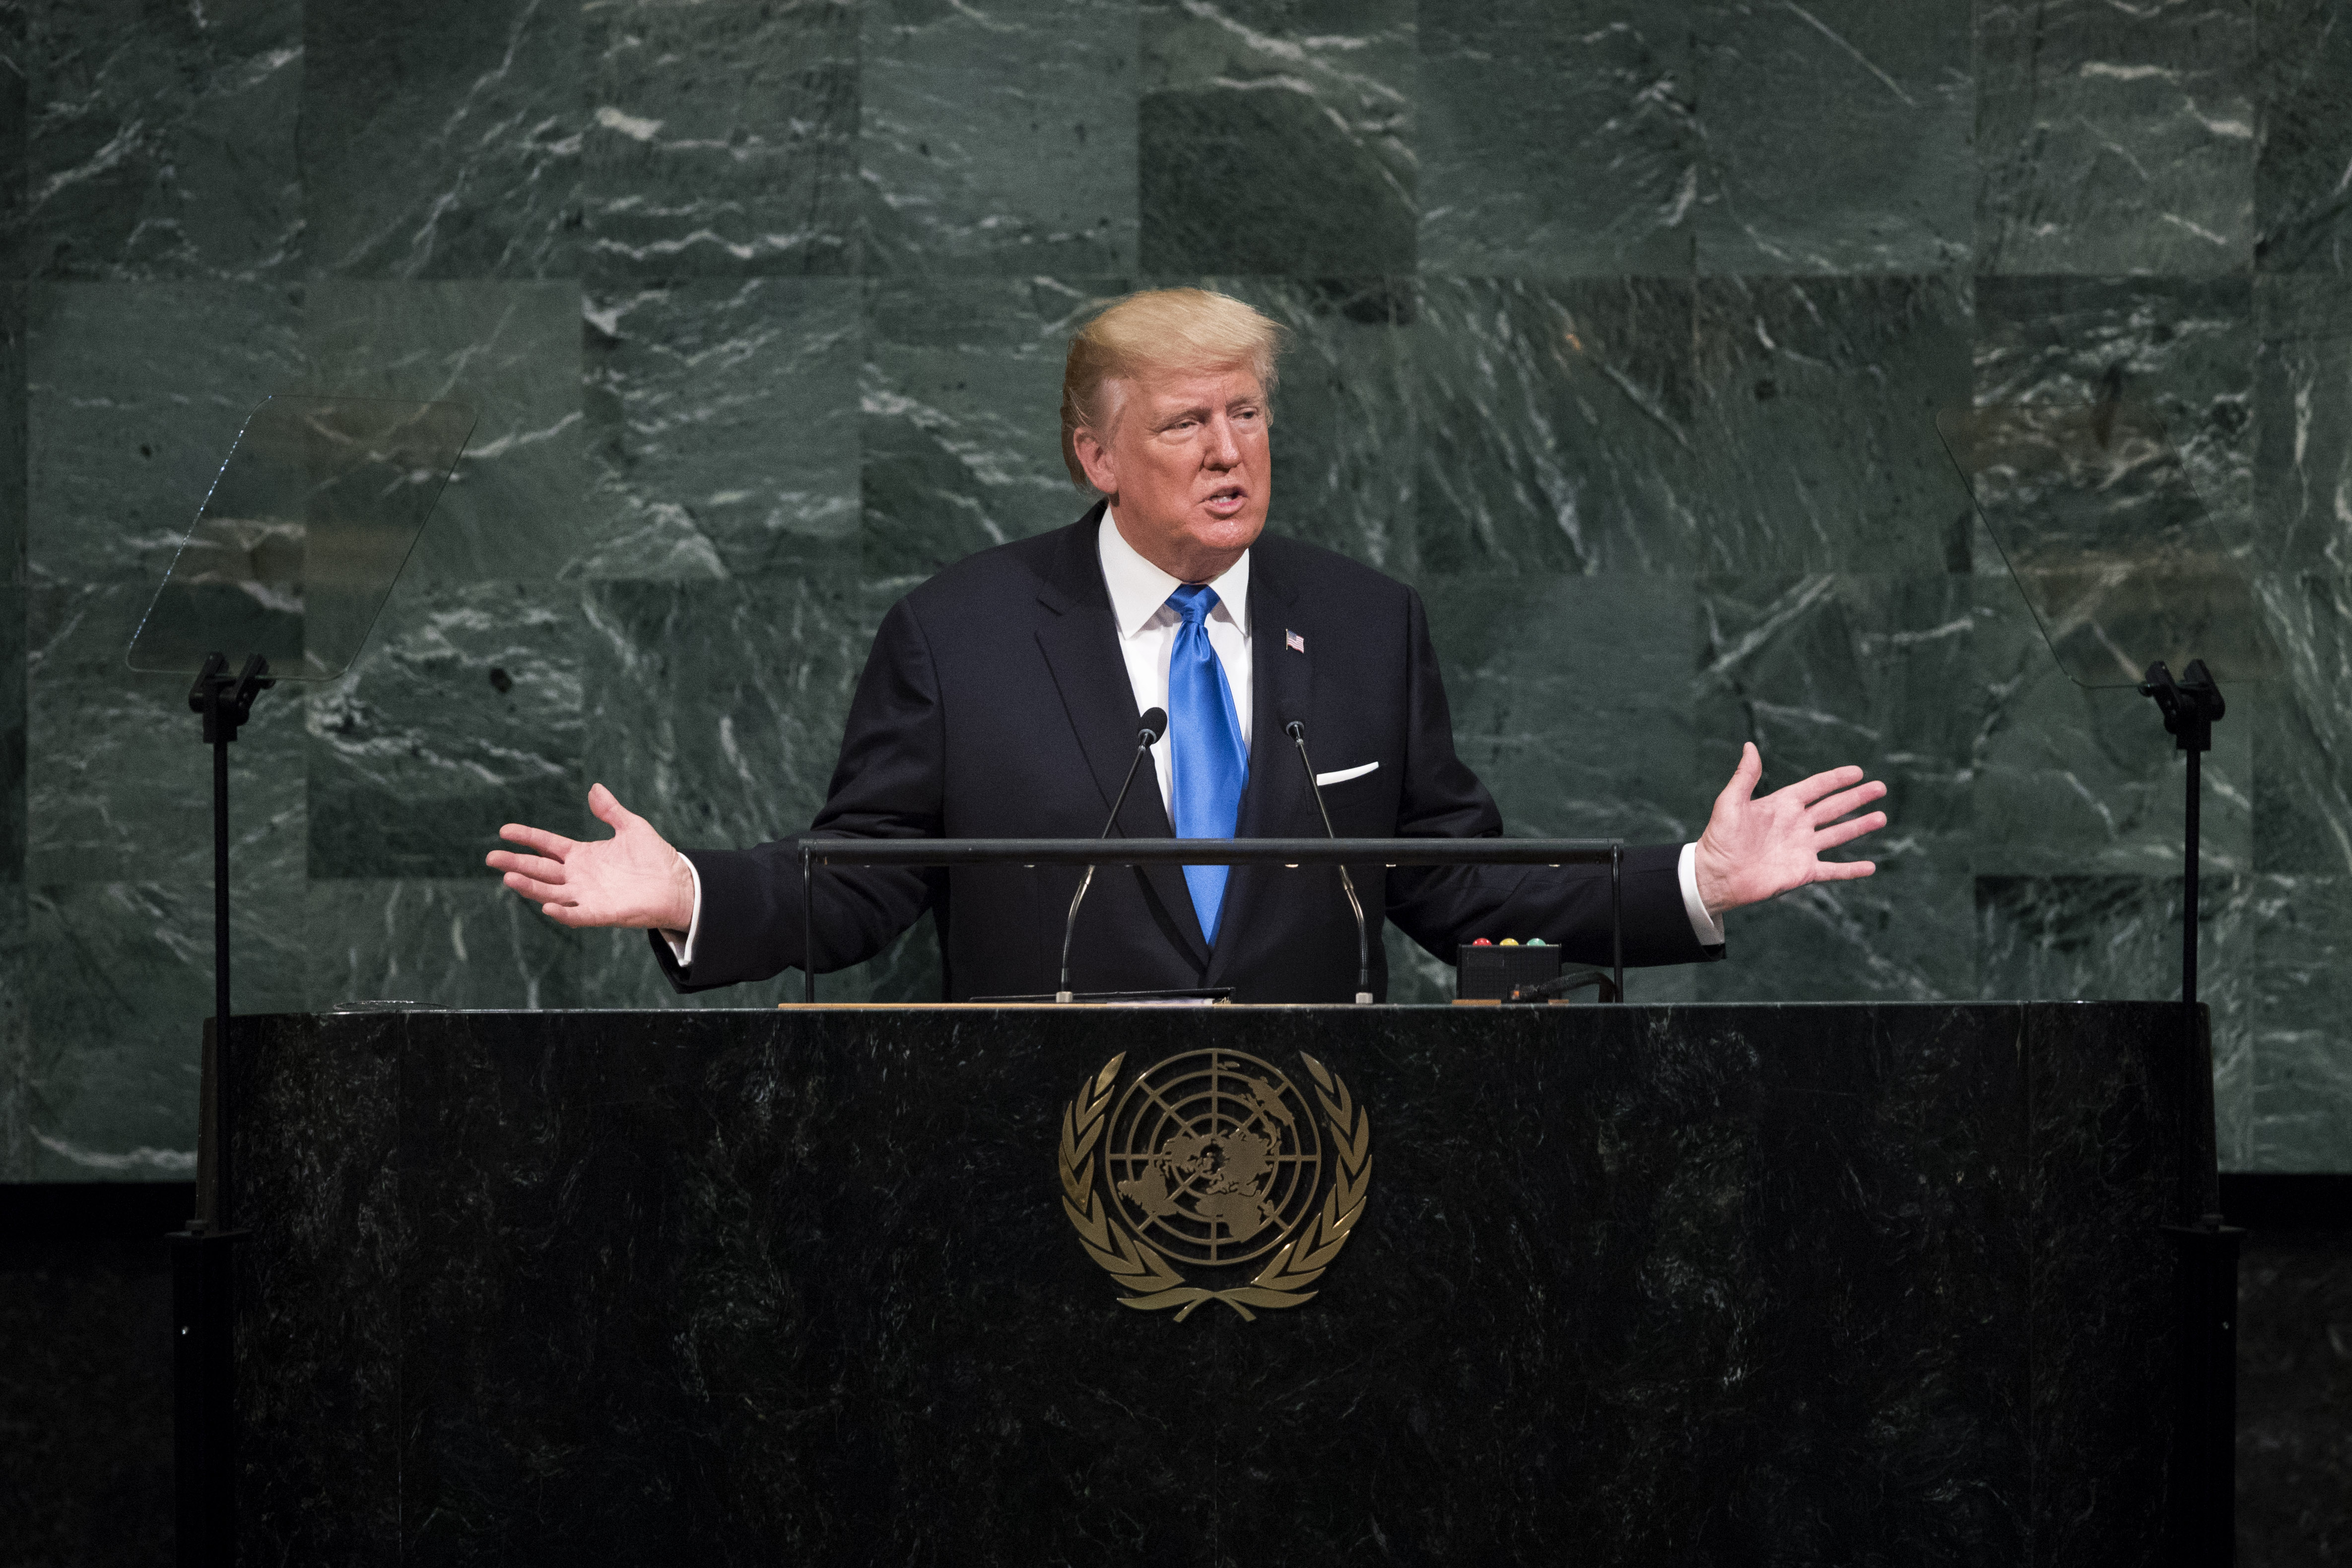 US President Donald Trump addresses the 72nd Annual UN General Assembly in New York on Sept. 19, 2017. (Drew Angerer—Getty Images)